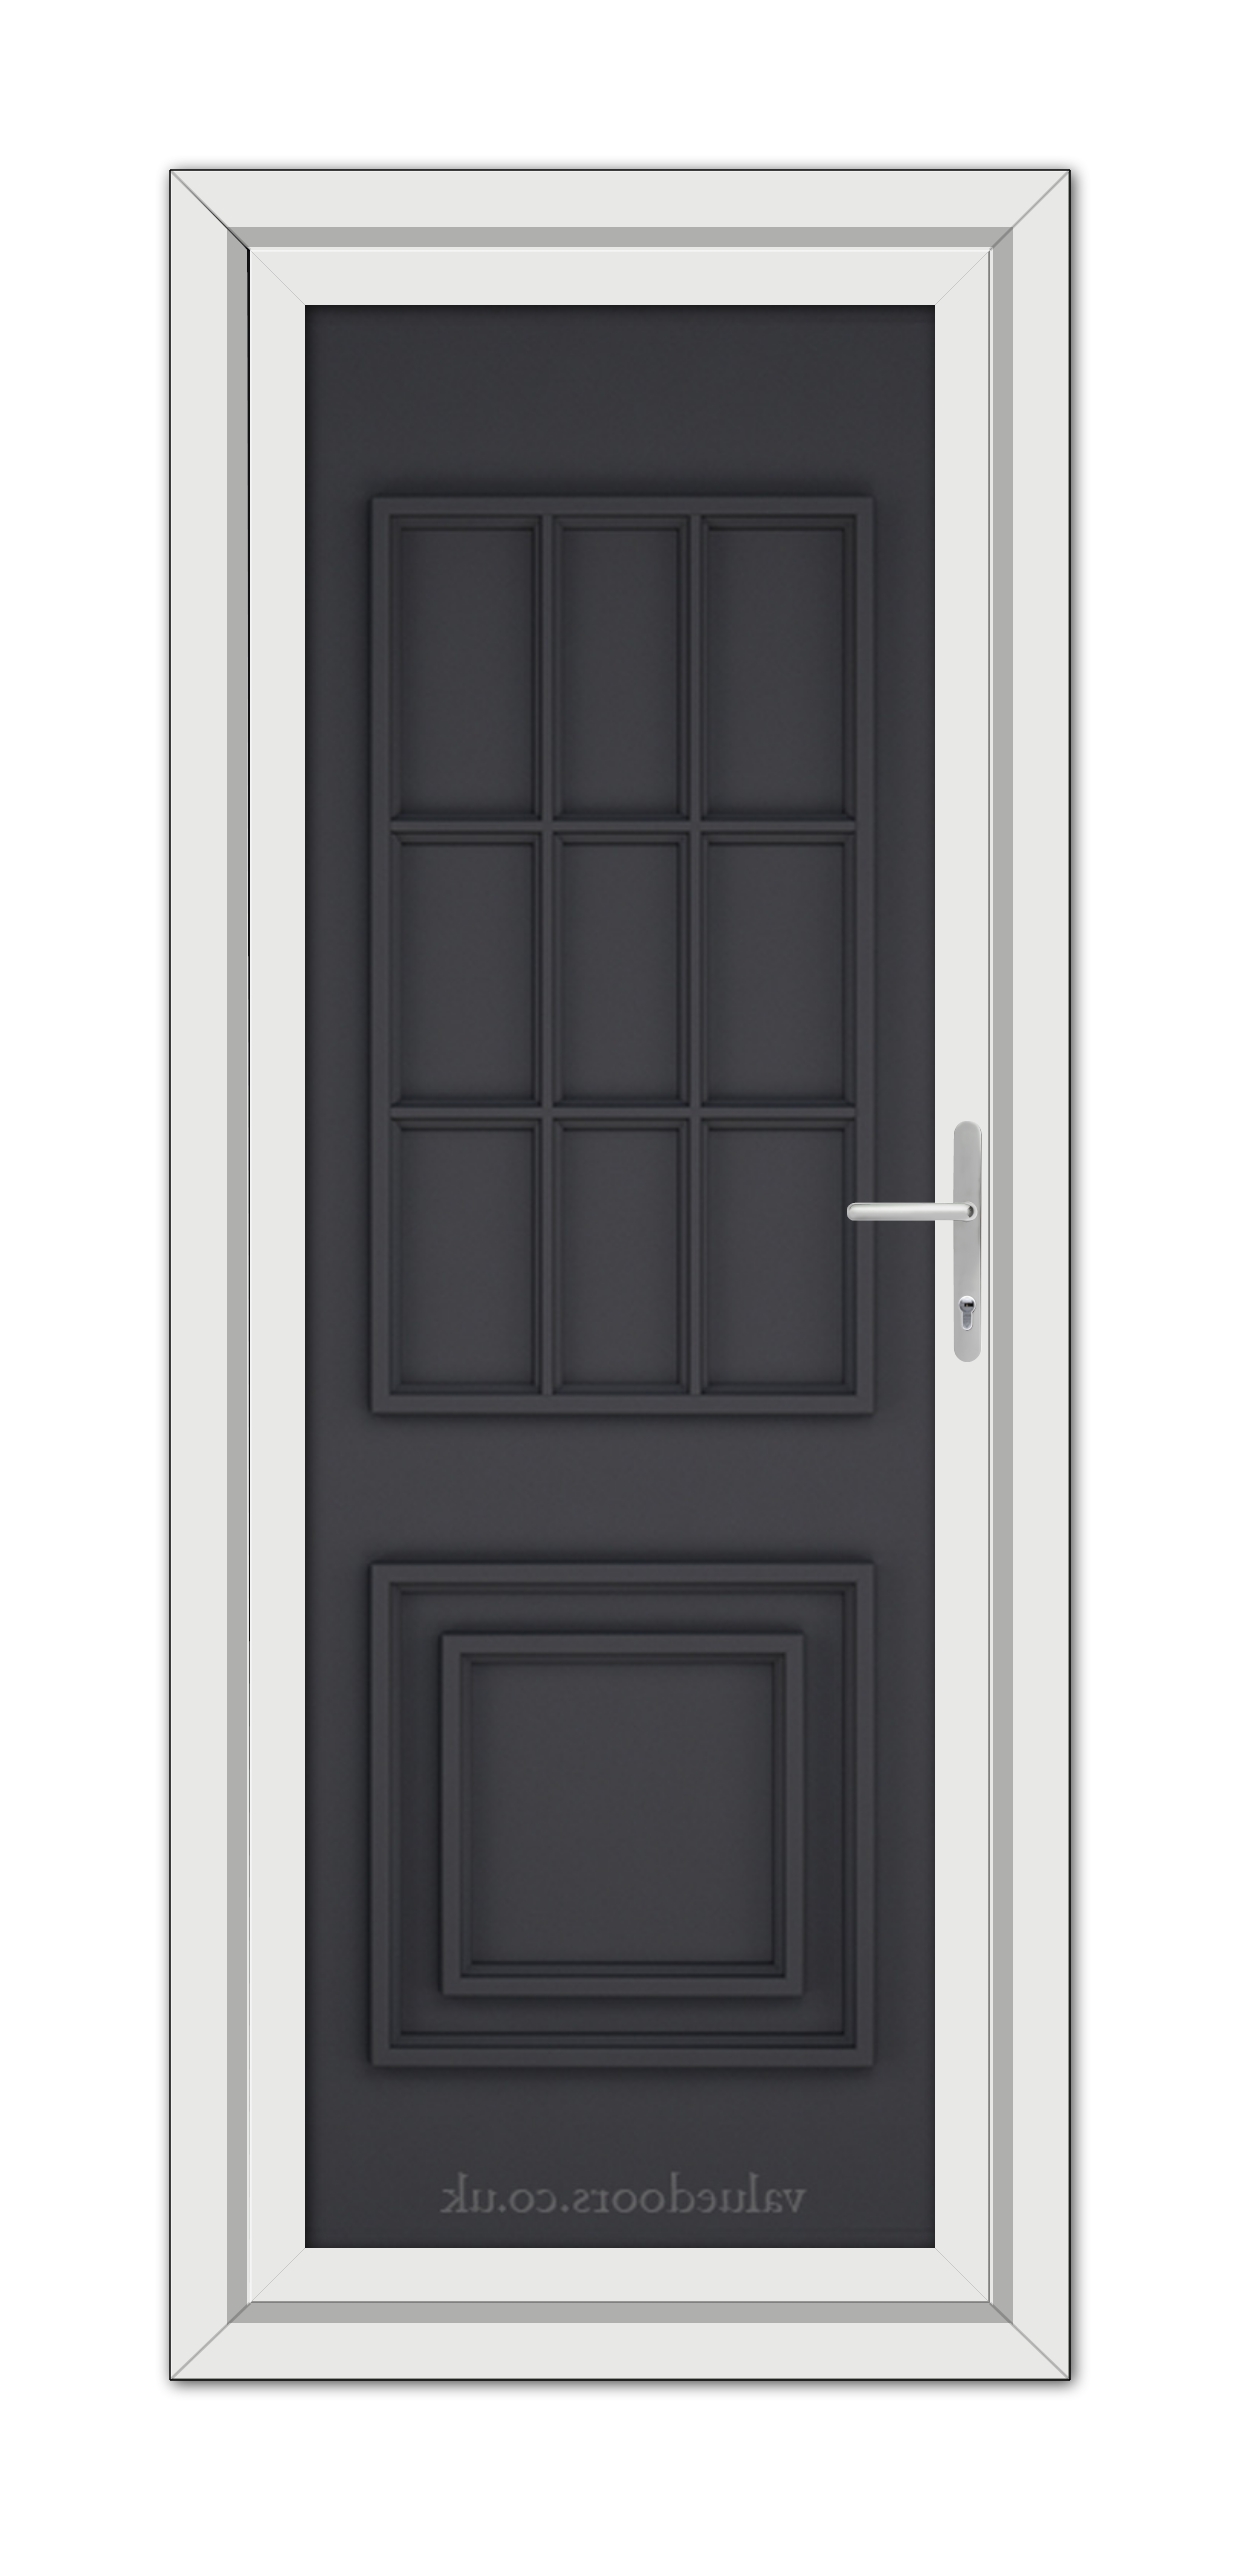 A modern grey Cambridge One Solid uPVC door with a metal handle, featuring a rectangular frame and multiple inset panels.